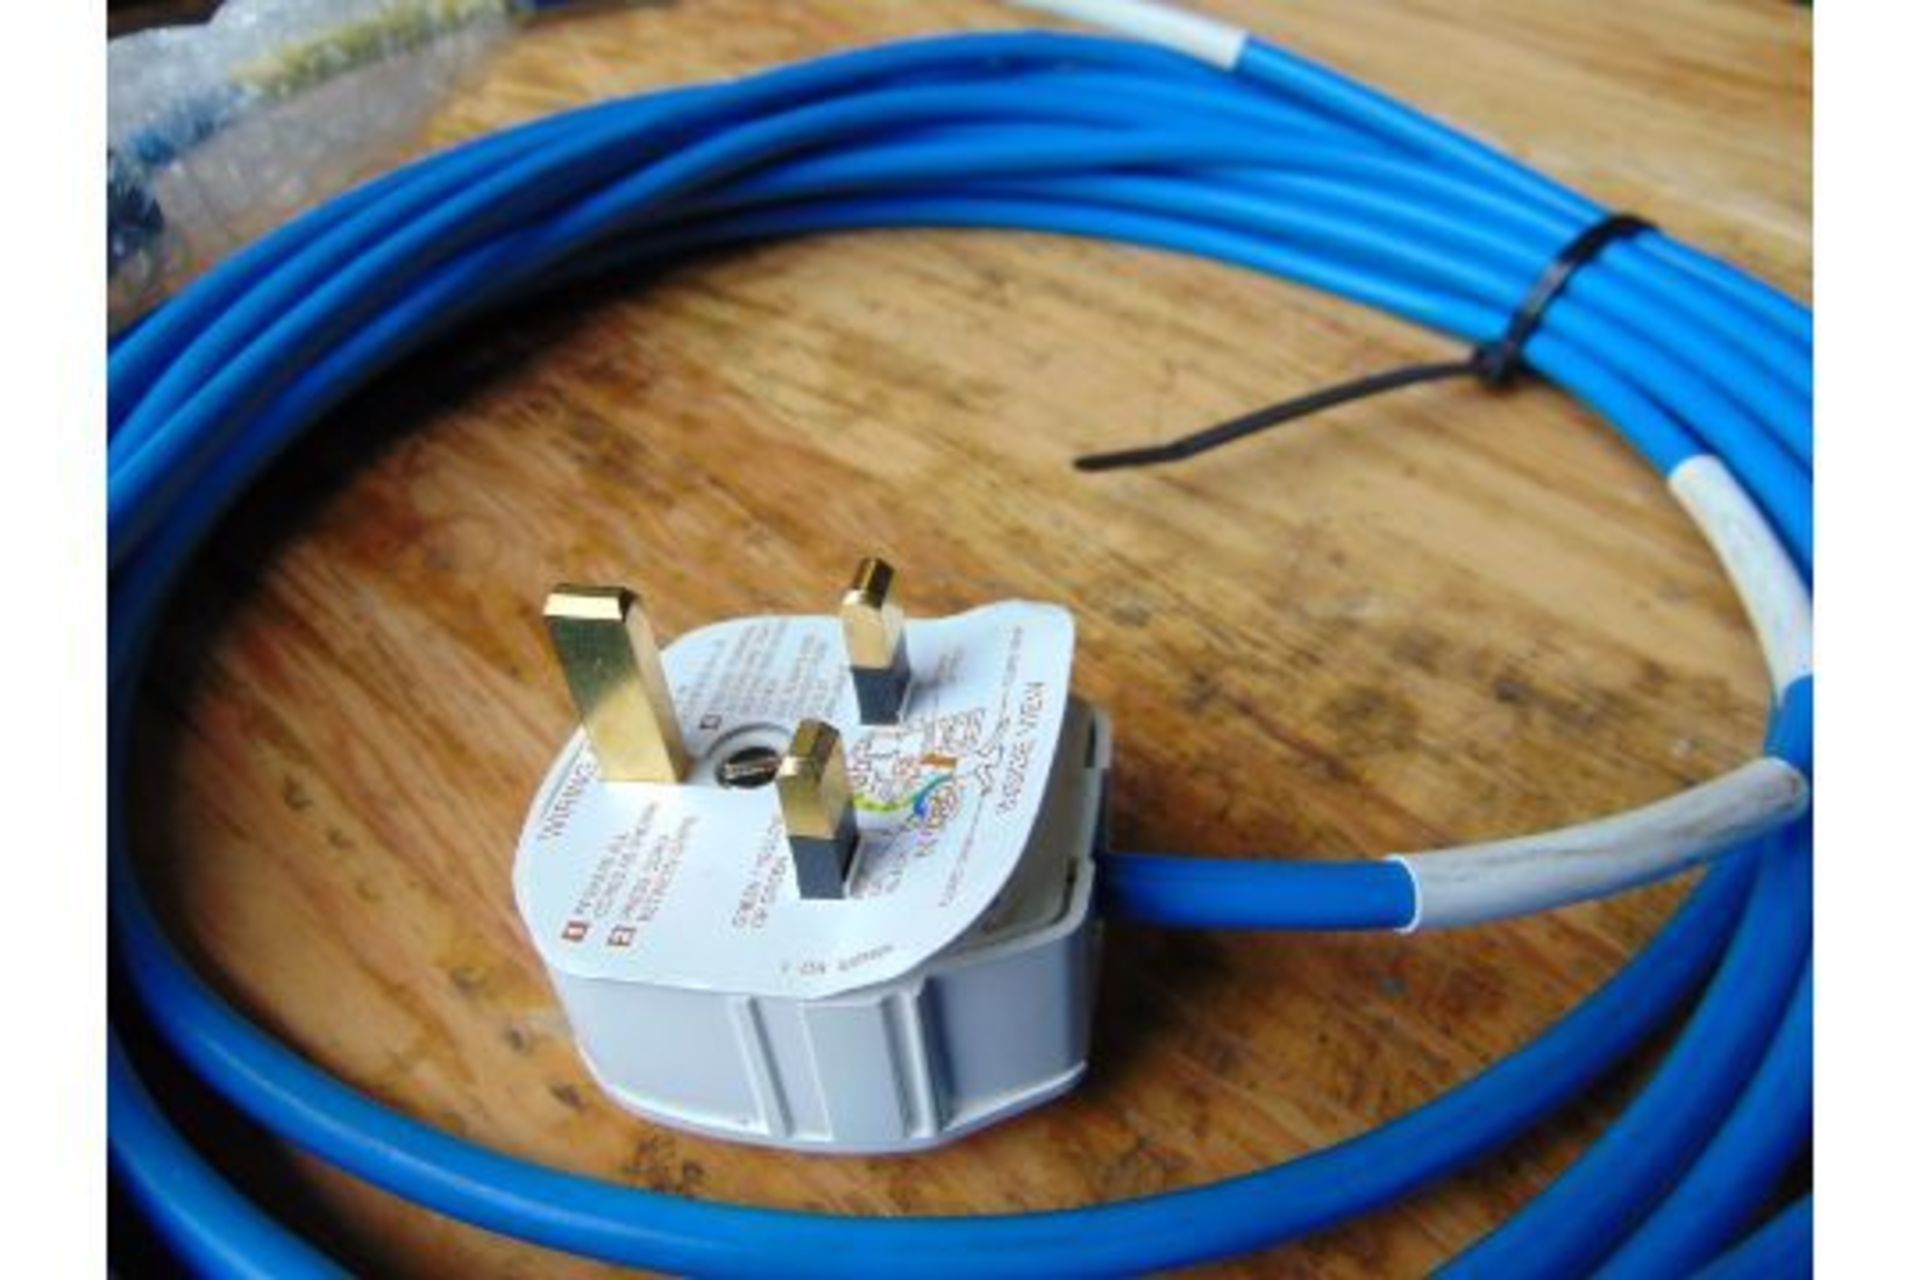 You are bidding on 2 x Extension Power Cables - Image 4 of 5